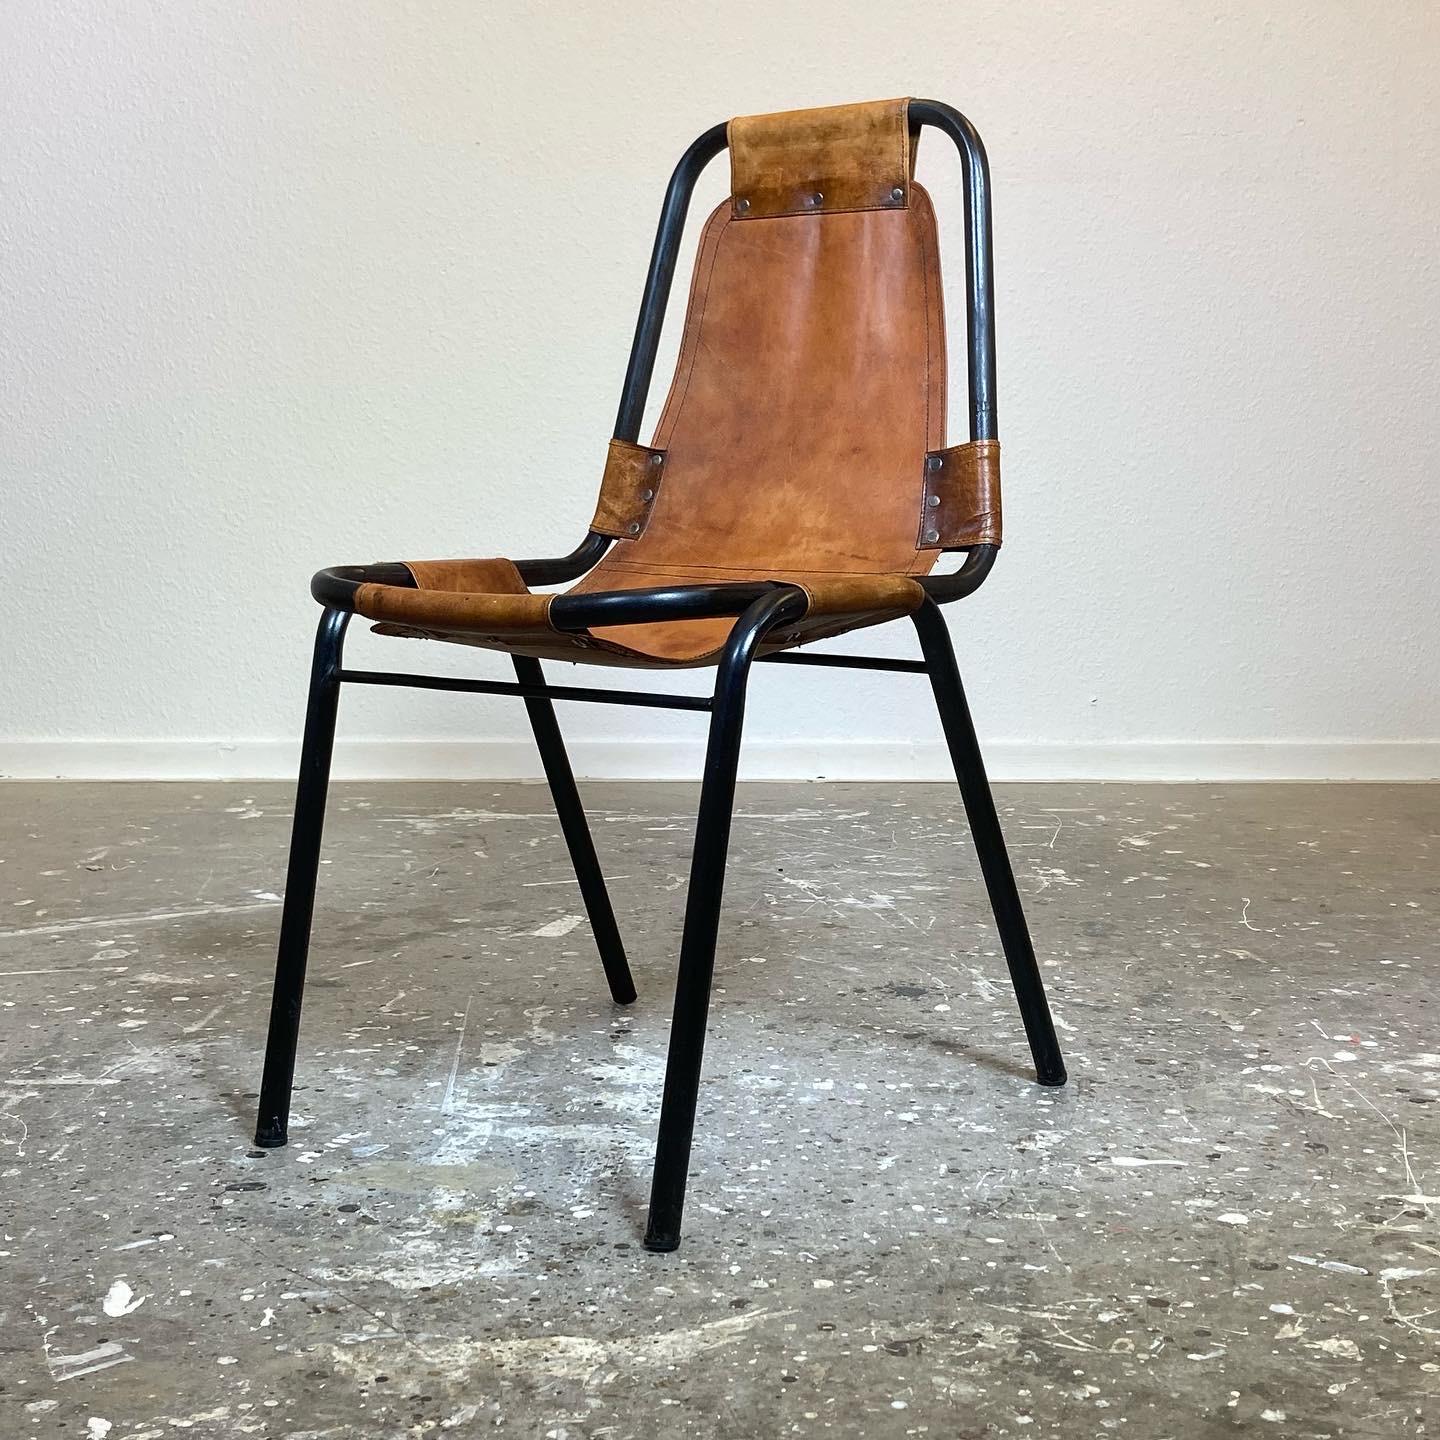 Original Les Arcs chair by Charlotte Perriand for the ski resort of the same name designed and project managed by Perriand. Beautiful patina on the leather riveted to the black tubular steel frame. In good vintage condition and from the first series